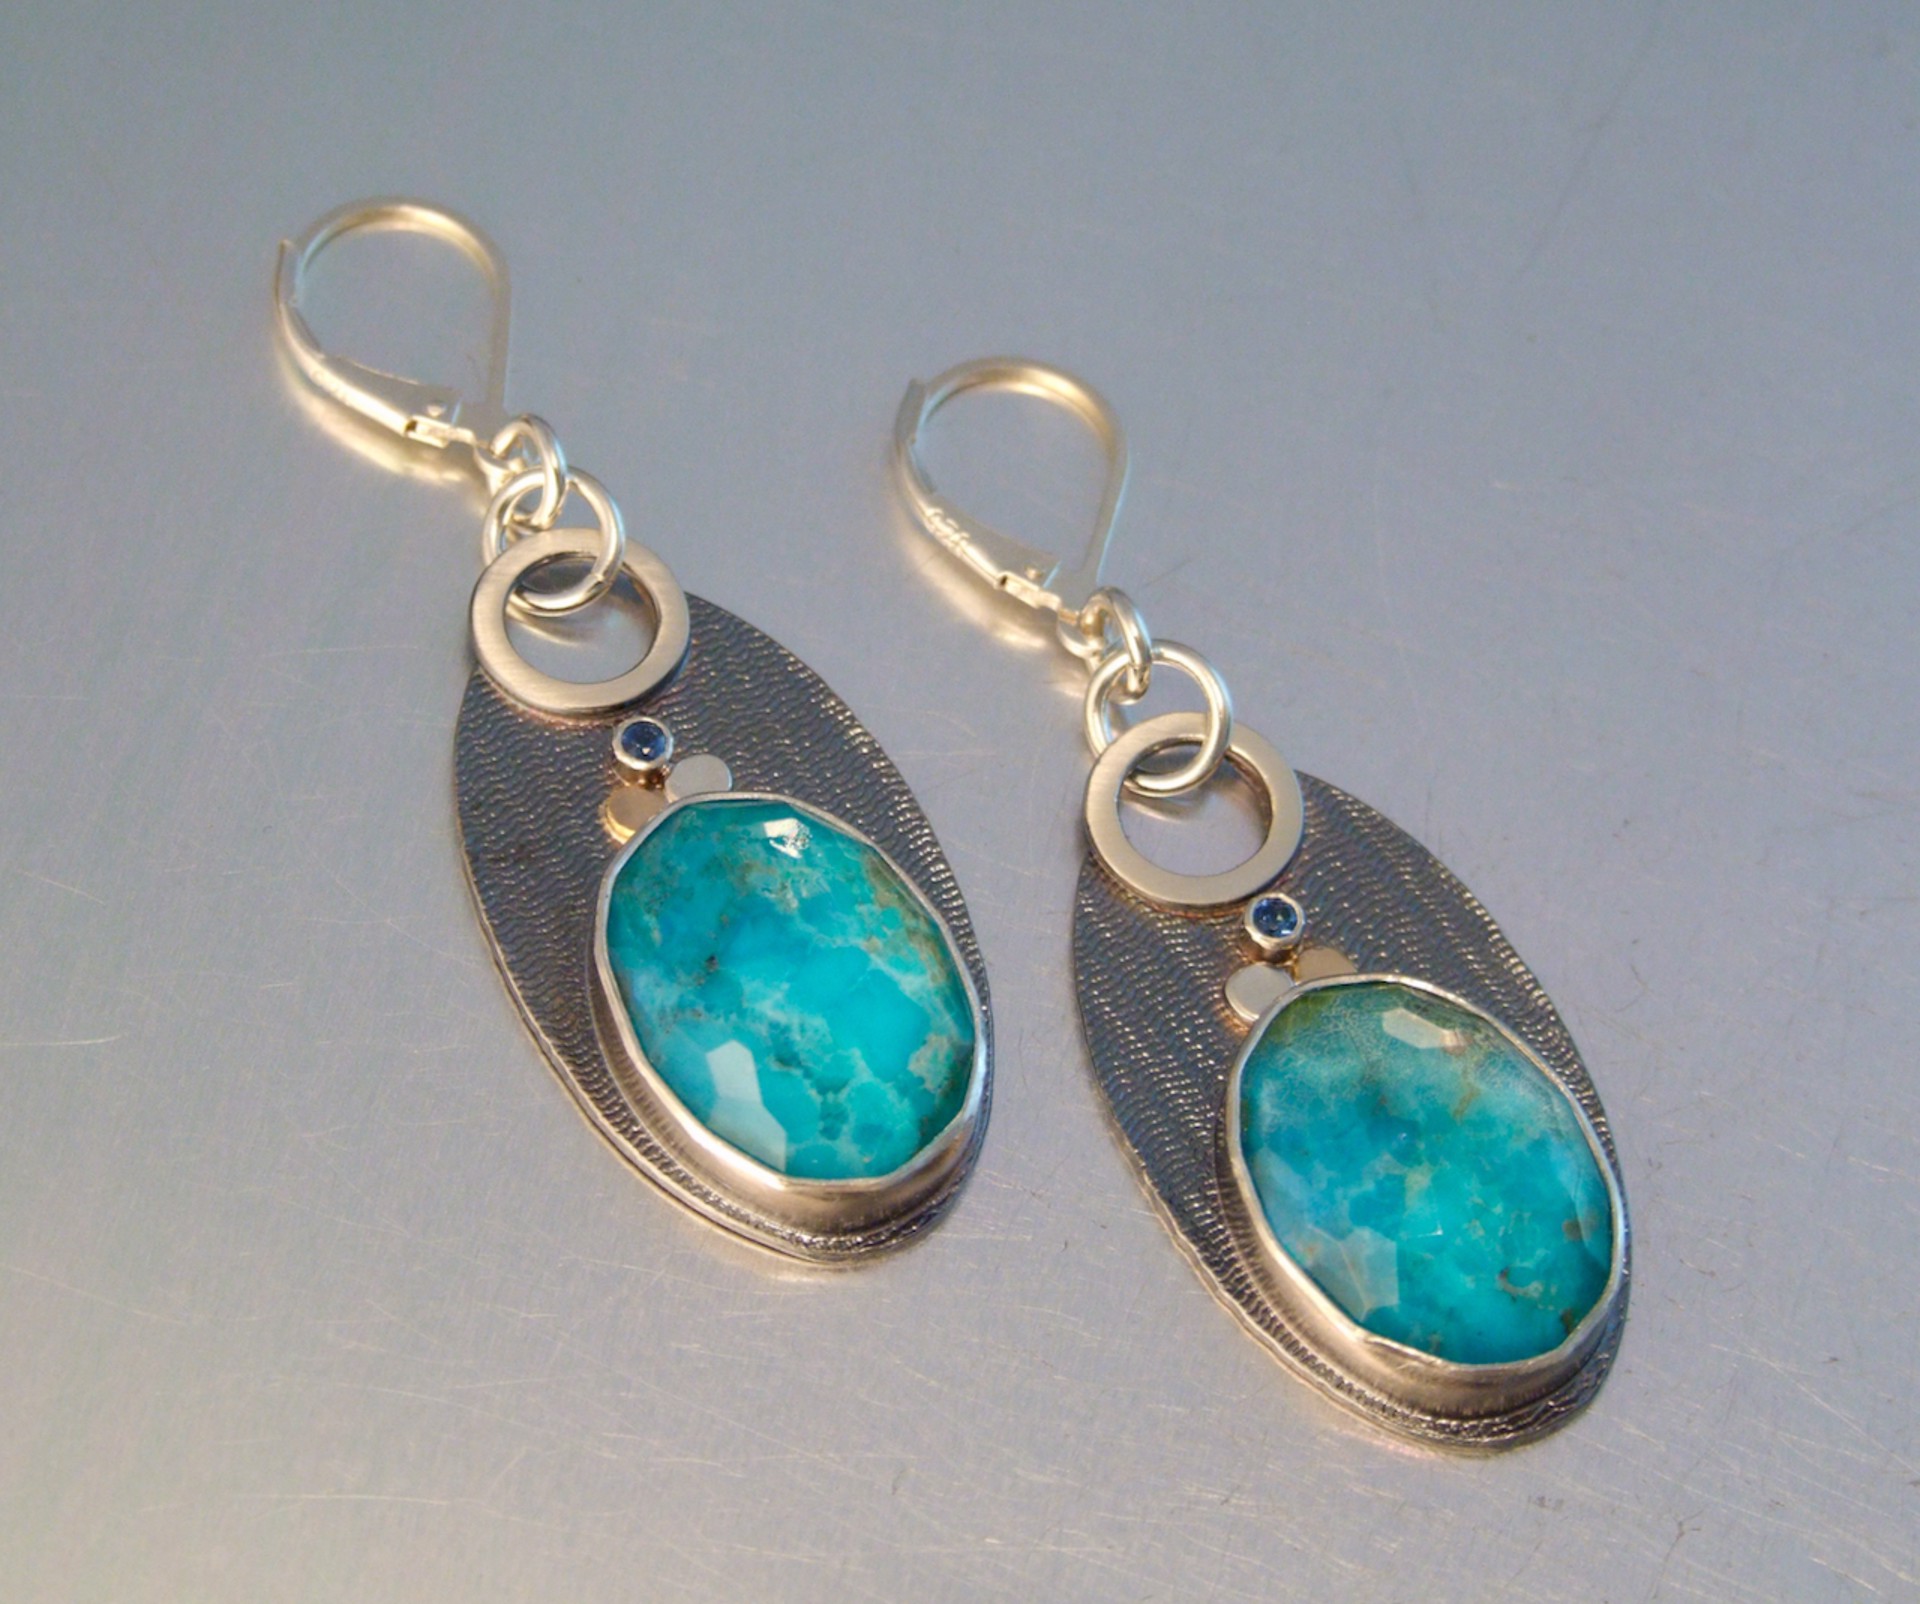 Quantic Luxe Earrings by Melody Armstrong